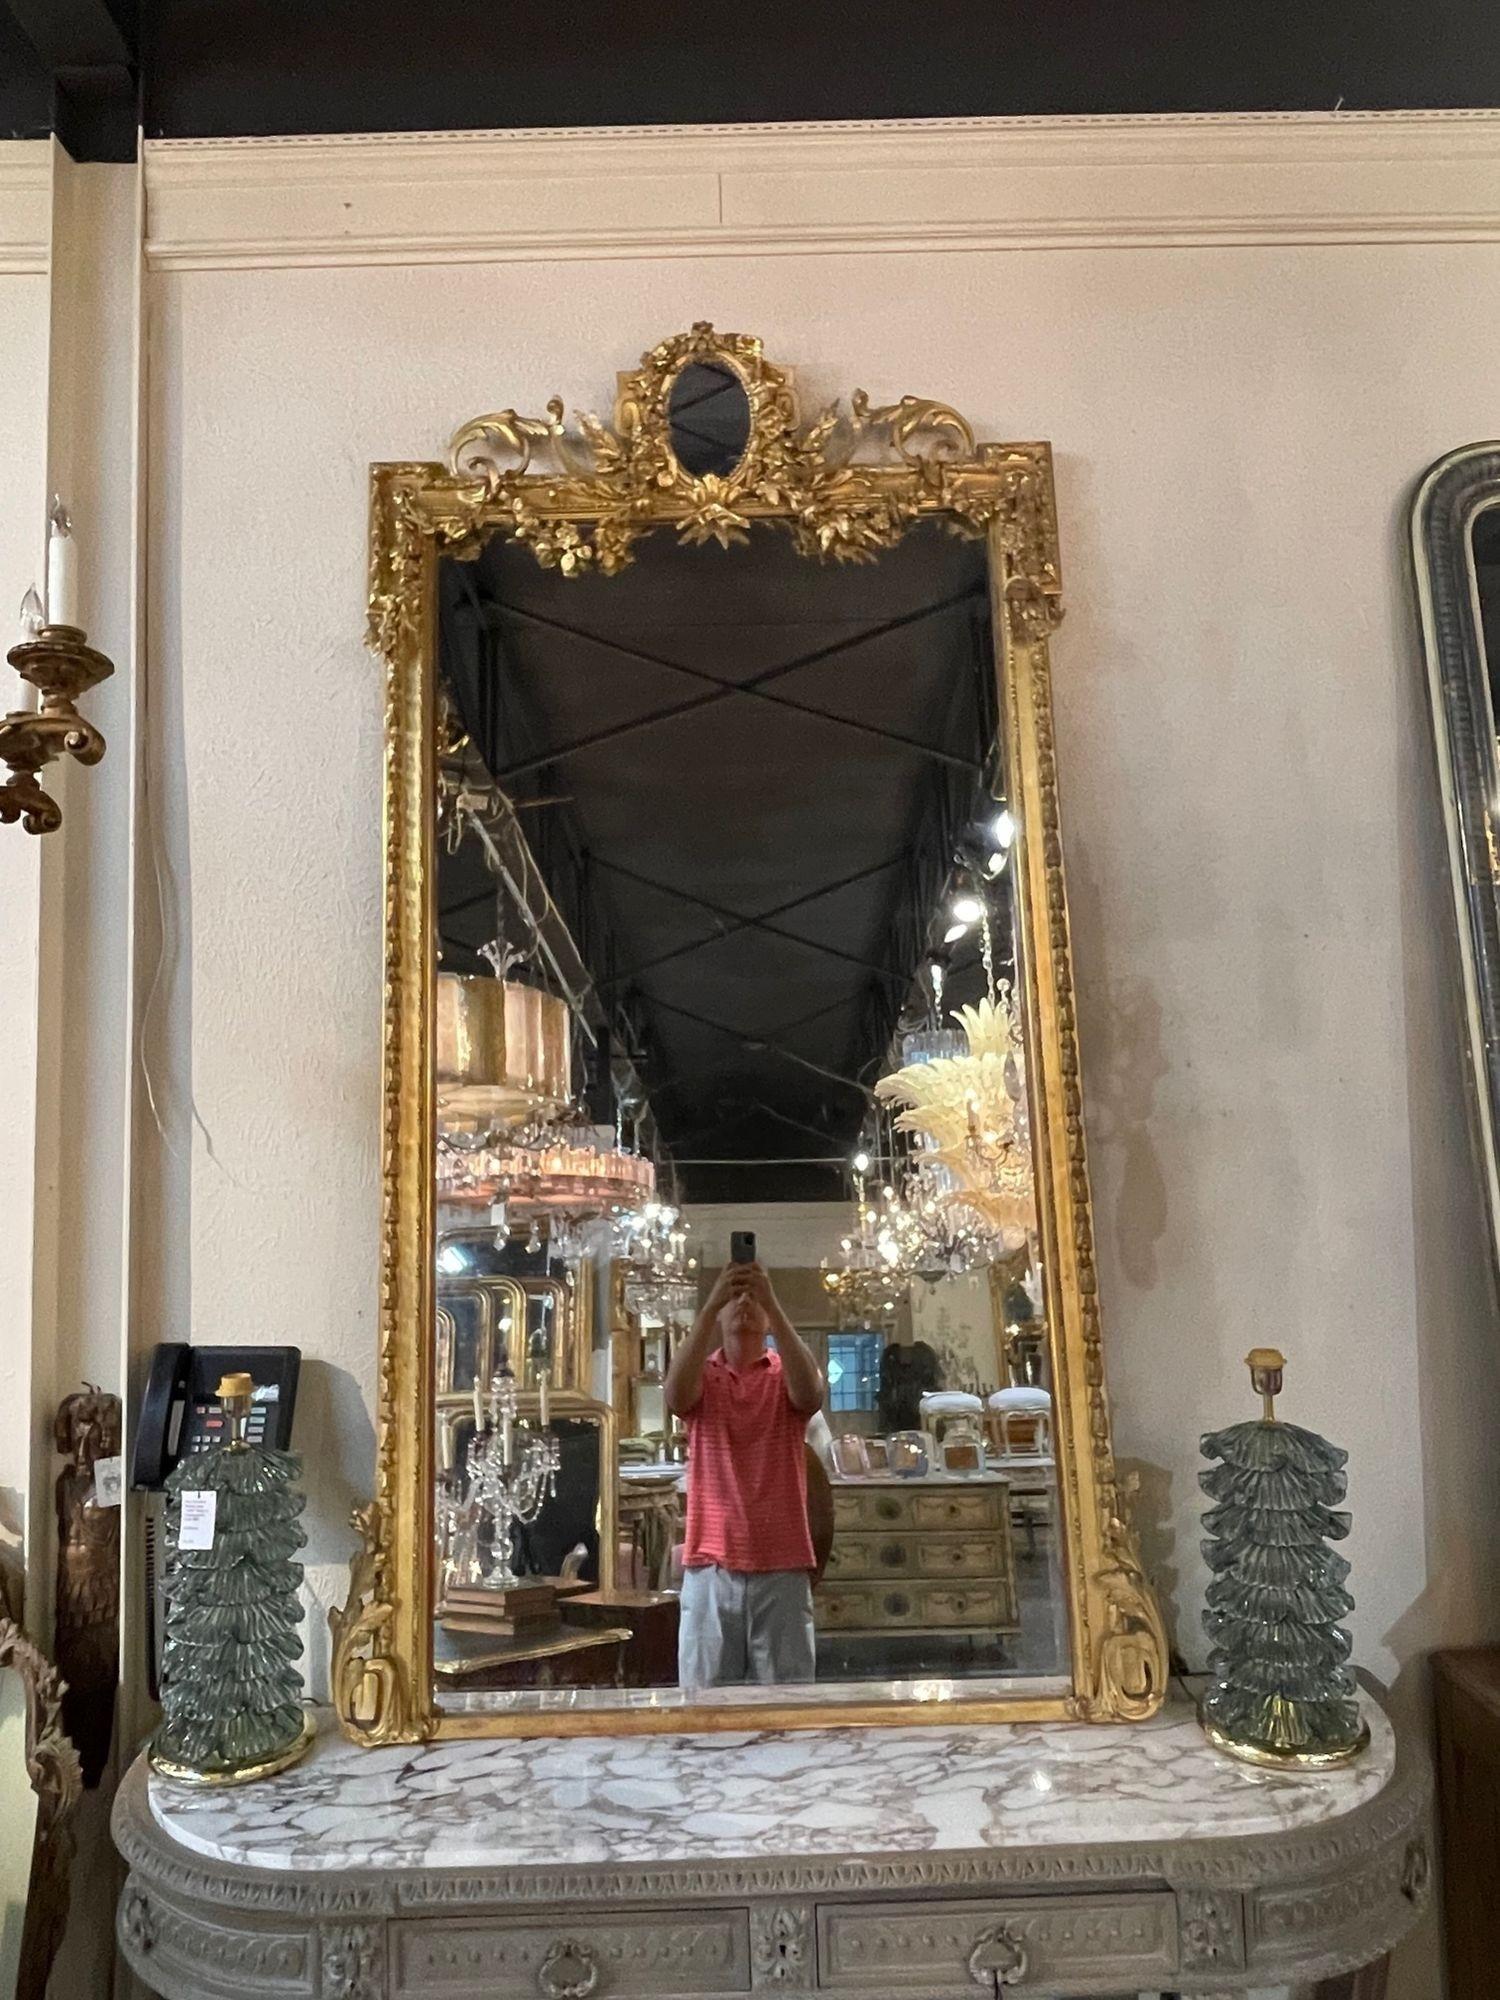 Elegant large scale 19th century French Louis XVI carved and giltwood mirror. Featuring very fine carvings including beautiful flowers and leaves with a smaller mirror at the top. A truly exceptional piece! So impressive!